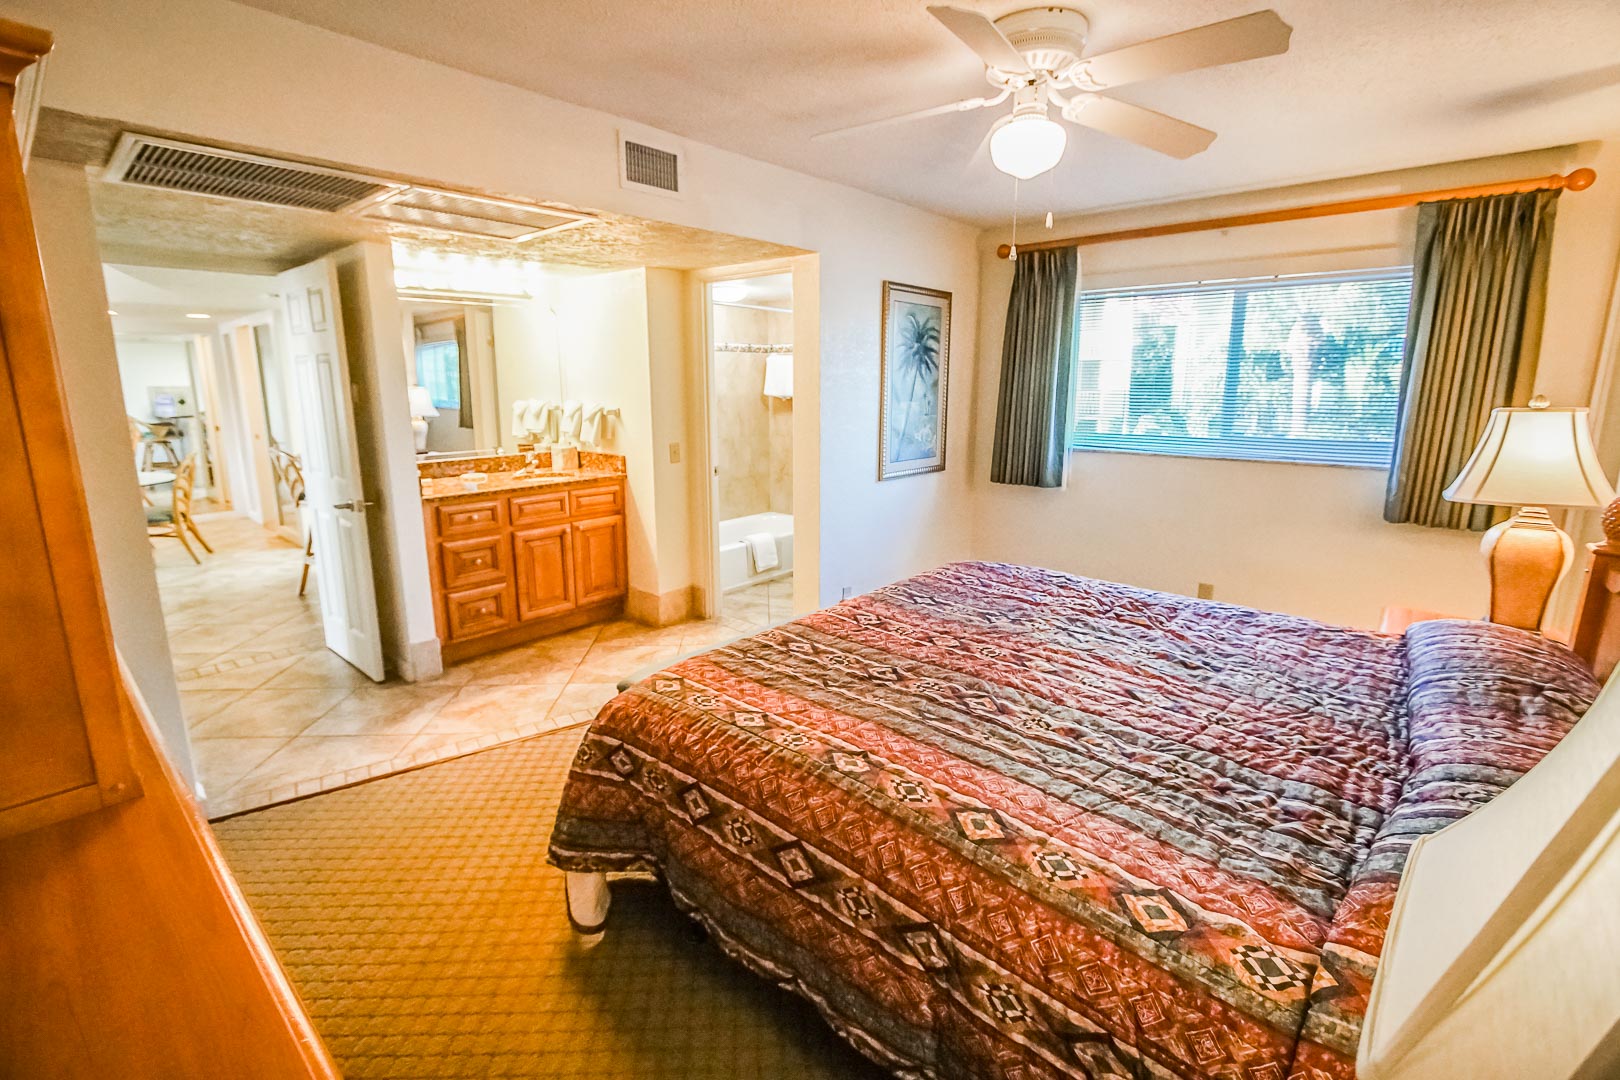 An expansive master bedroom at VRI's Coral Reef Beach Resort in St. Pete Beach, Florida.